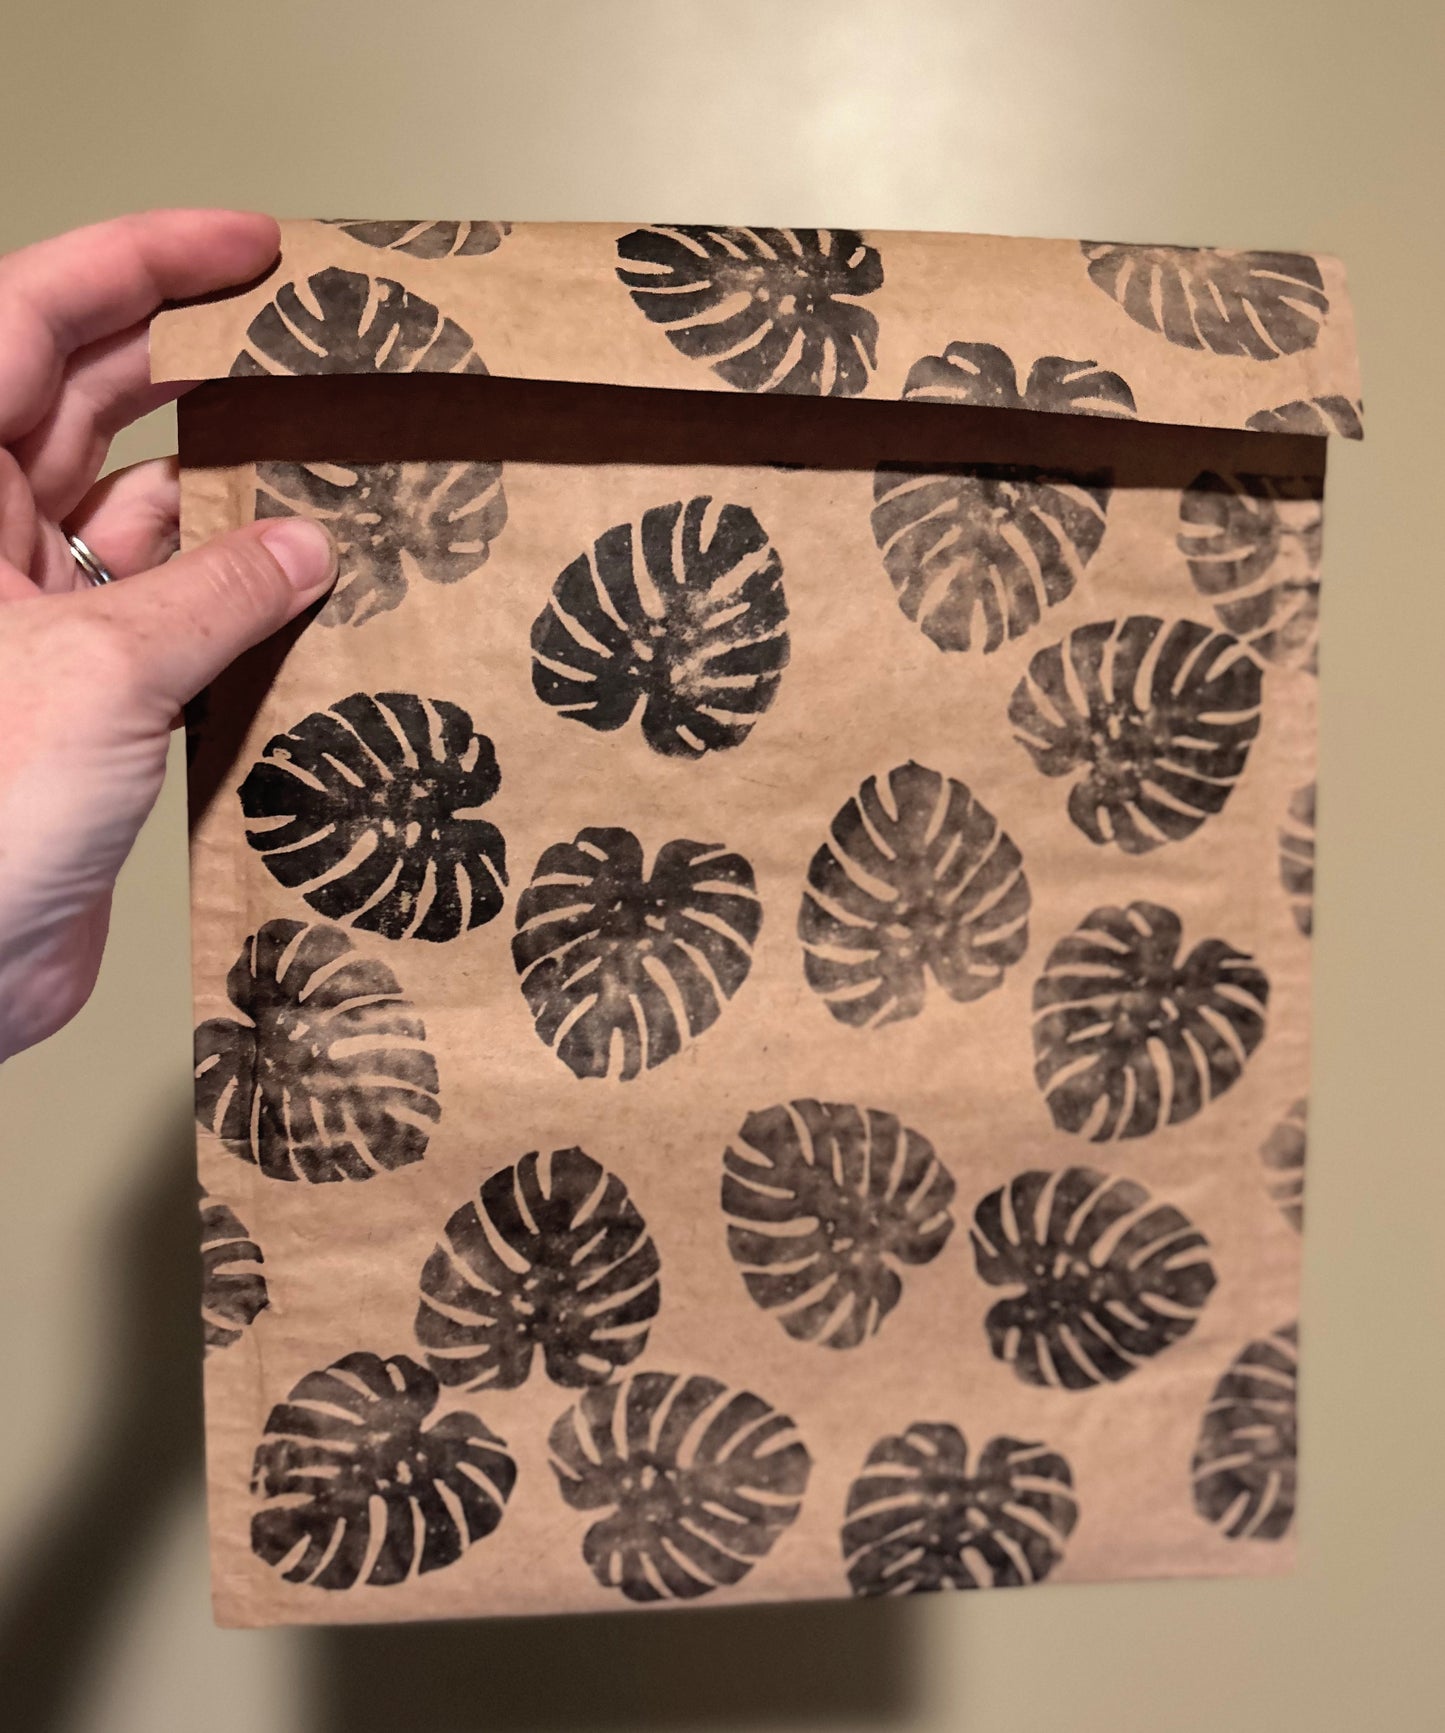 Monstera Leaf - Honeycomb Padded Biodegradable Mailers